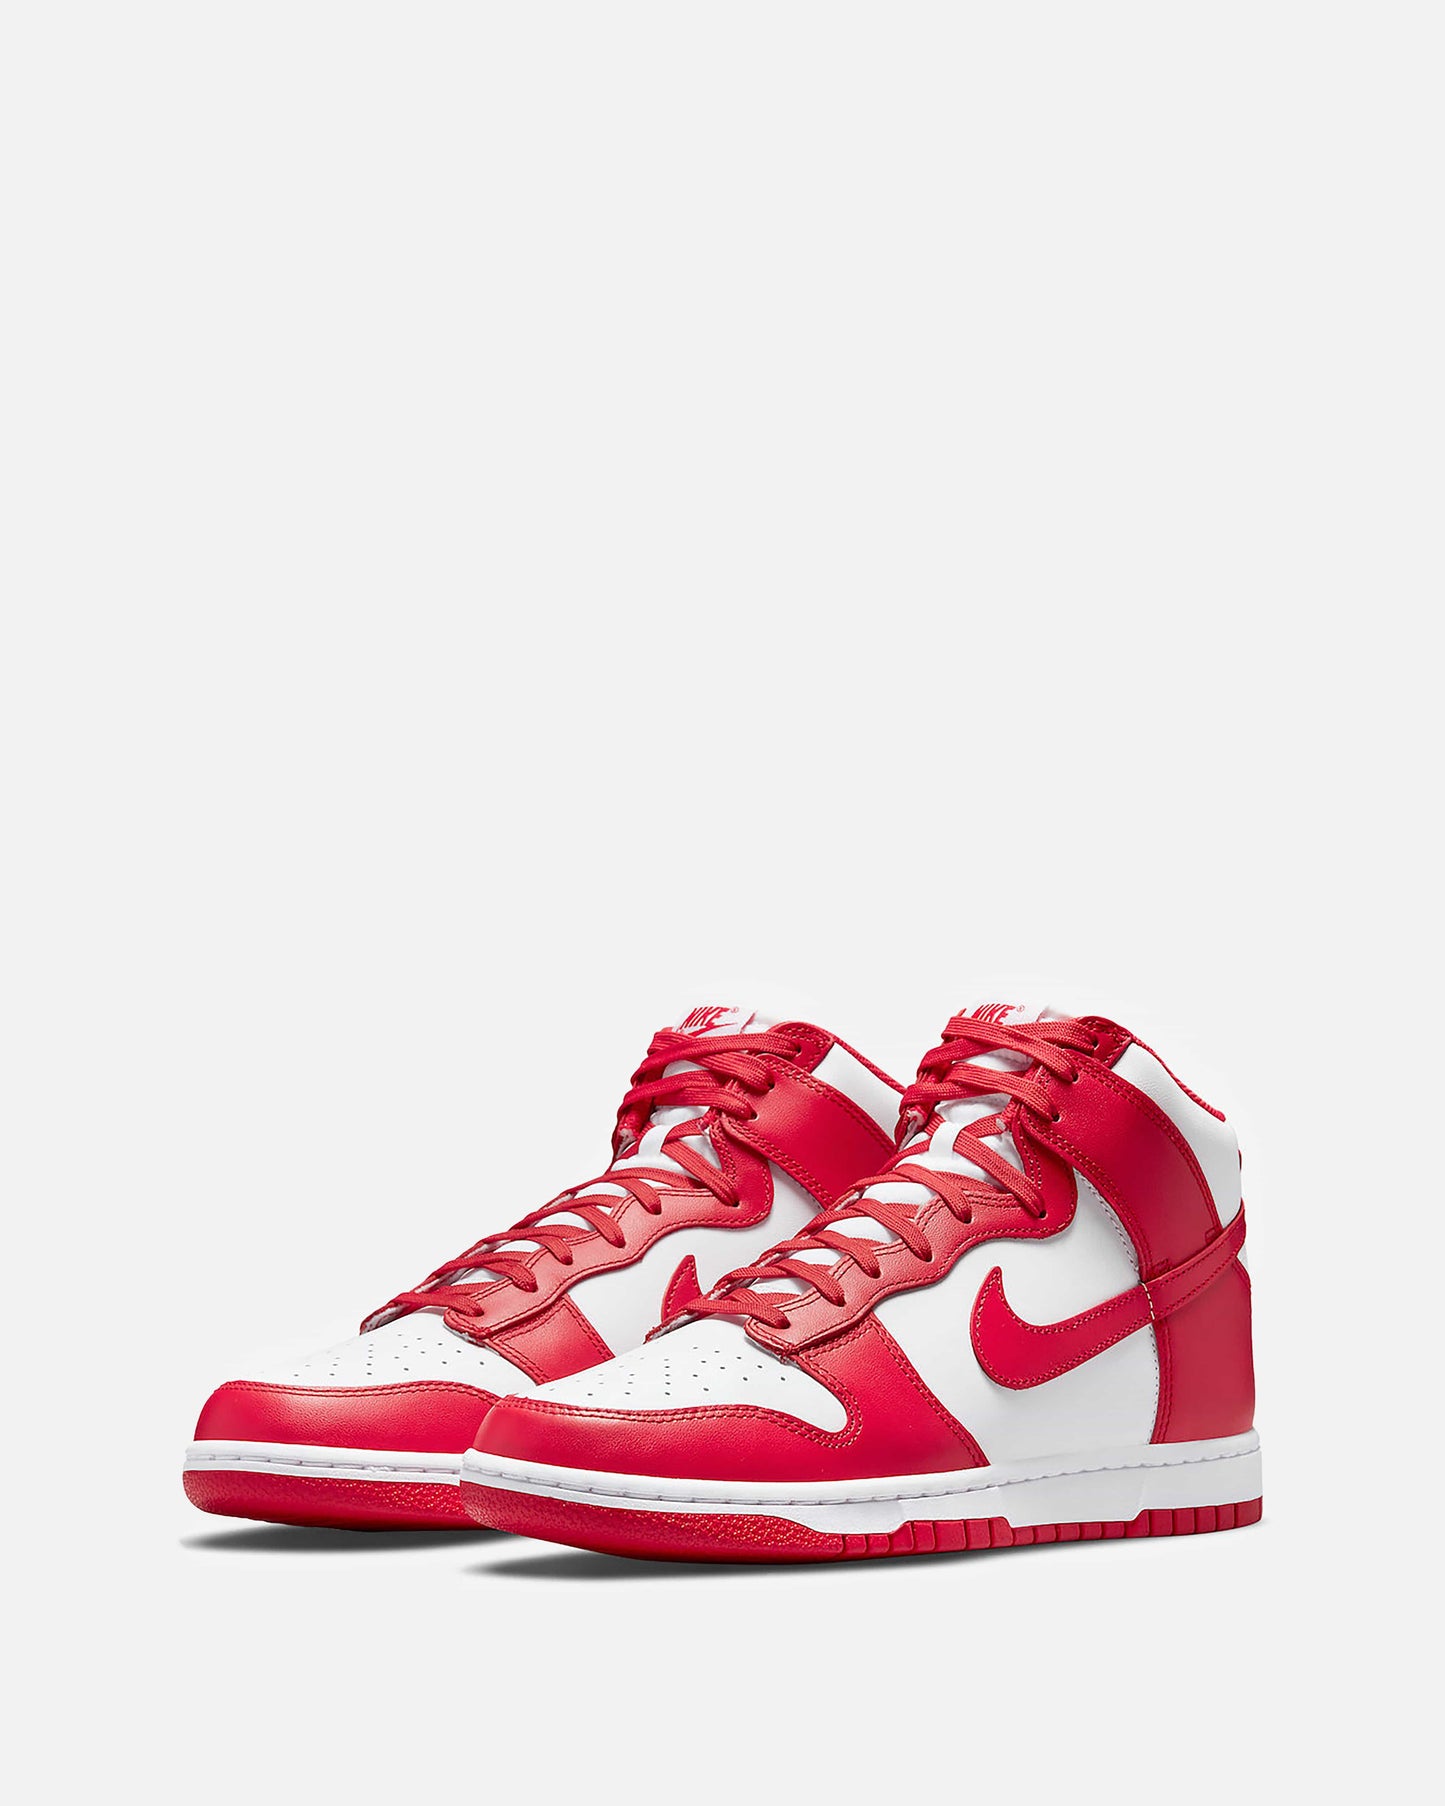 Nike Men's Sneakers Dunk High 'Championship Red'